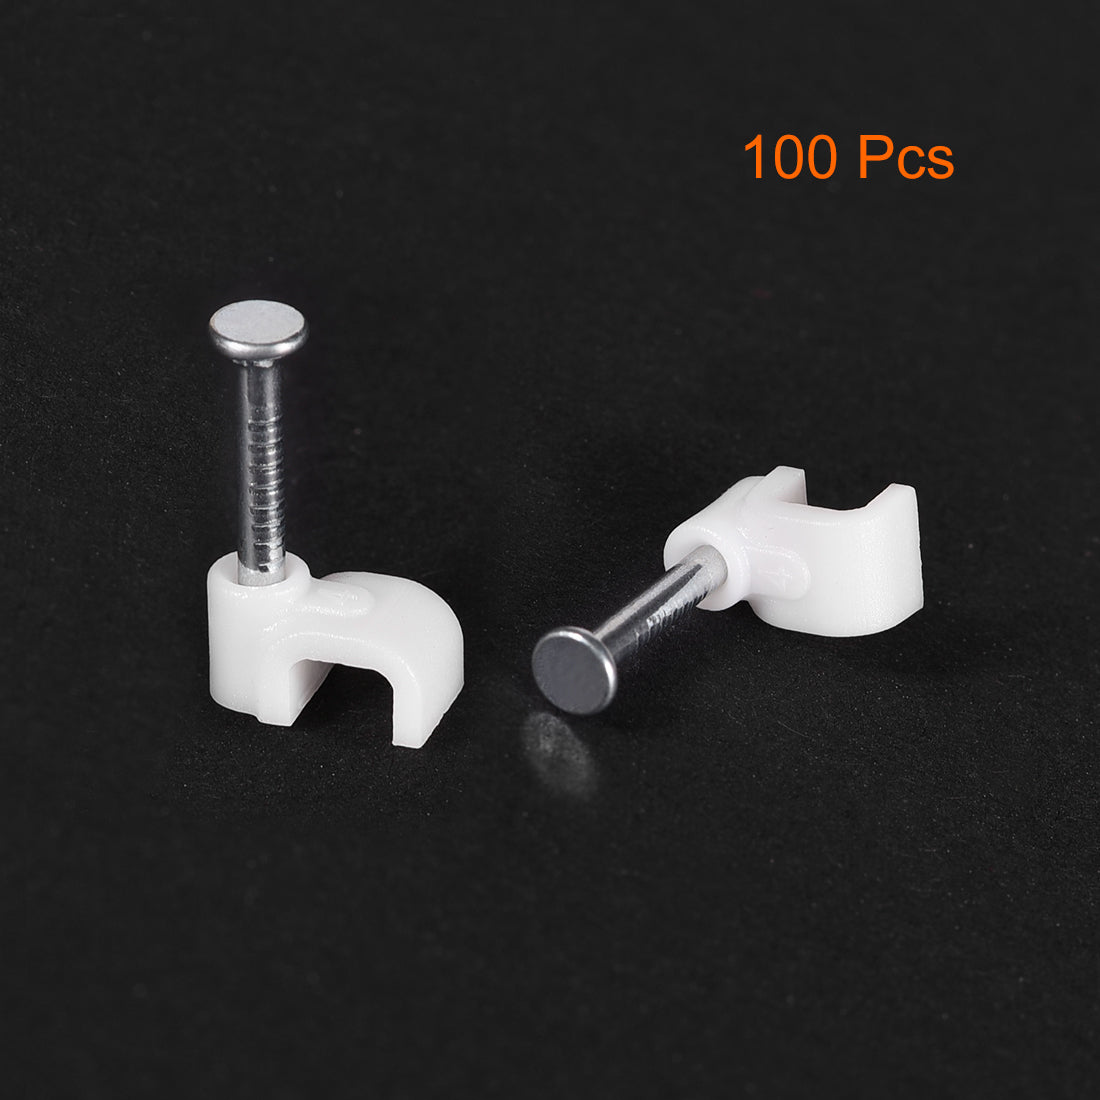 uxcell Uxcell Nail Cable Clips 4mm Clamps Wire Holder Square Fastener for Home Office Cords Management White 100Pcs